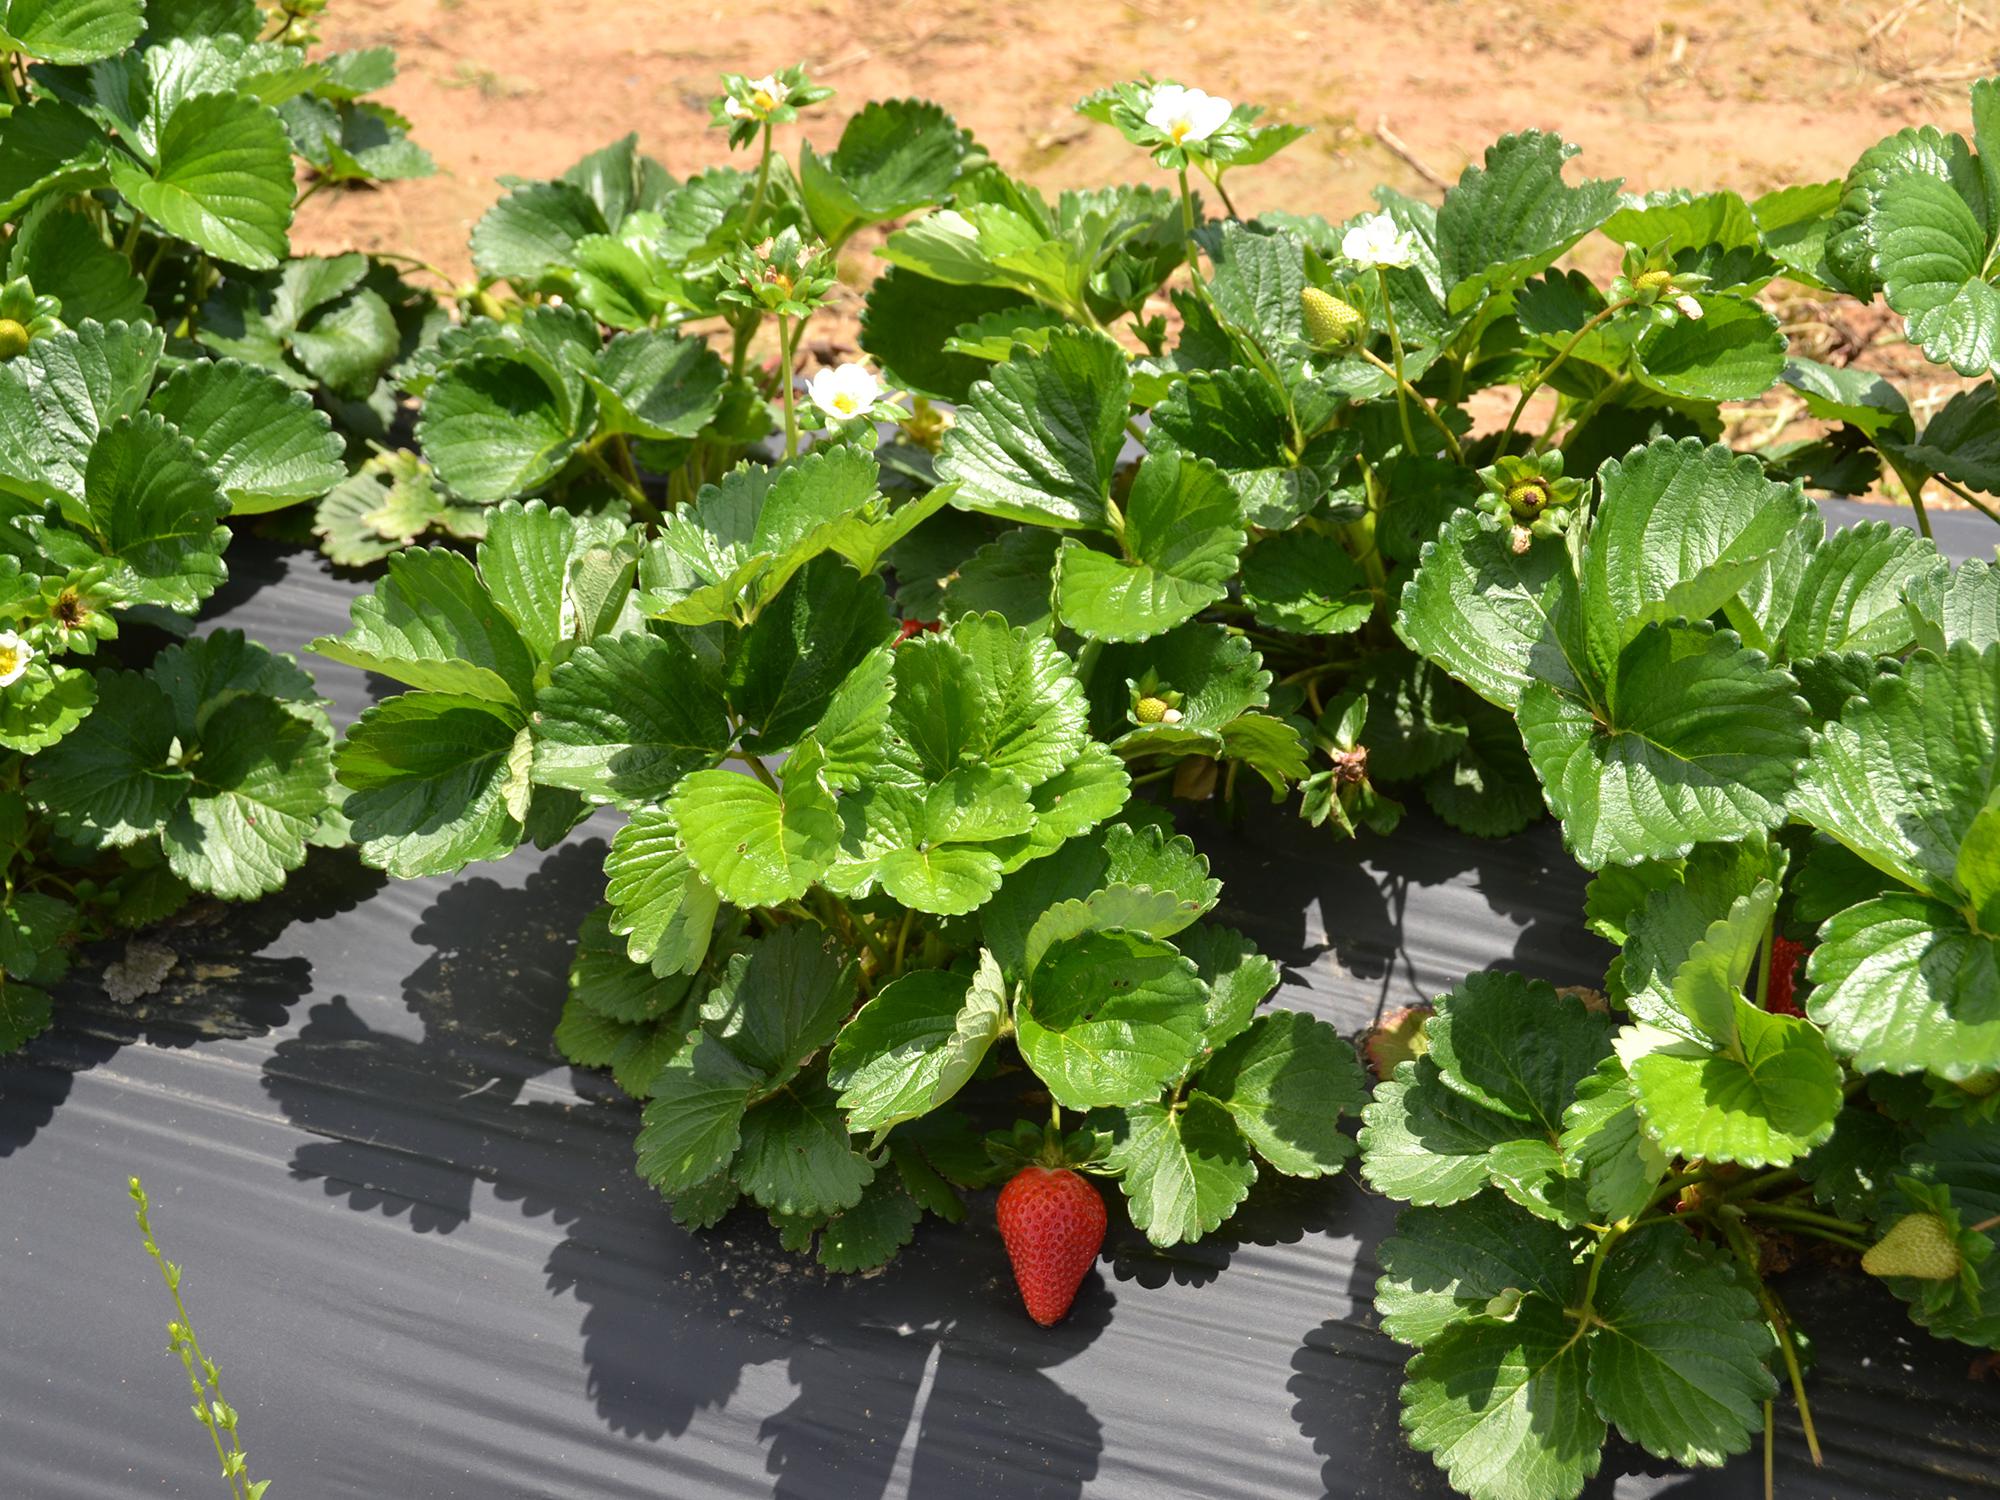 These Mercer variety strawberries growing at the Mississippi State University Truck Crops Branch Experiment Station in Crystal Springs looked good on April 21, 2016, despite rainy spring weather that has increased disease pressure on most of Mississippi’s crop. Researchers at the station are conducting a strawberry variety trial to help Mississippi producers choose the best performing varieties for the state. (Photo by MSU Extension Service/Susan Collins-Smith)